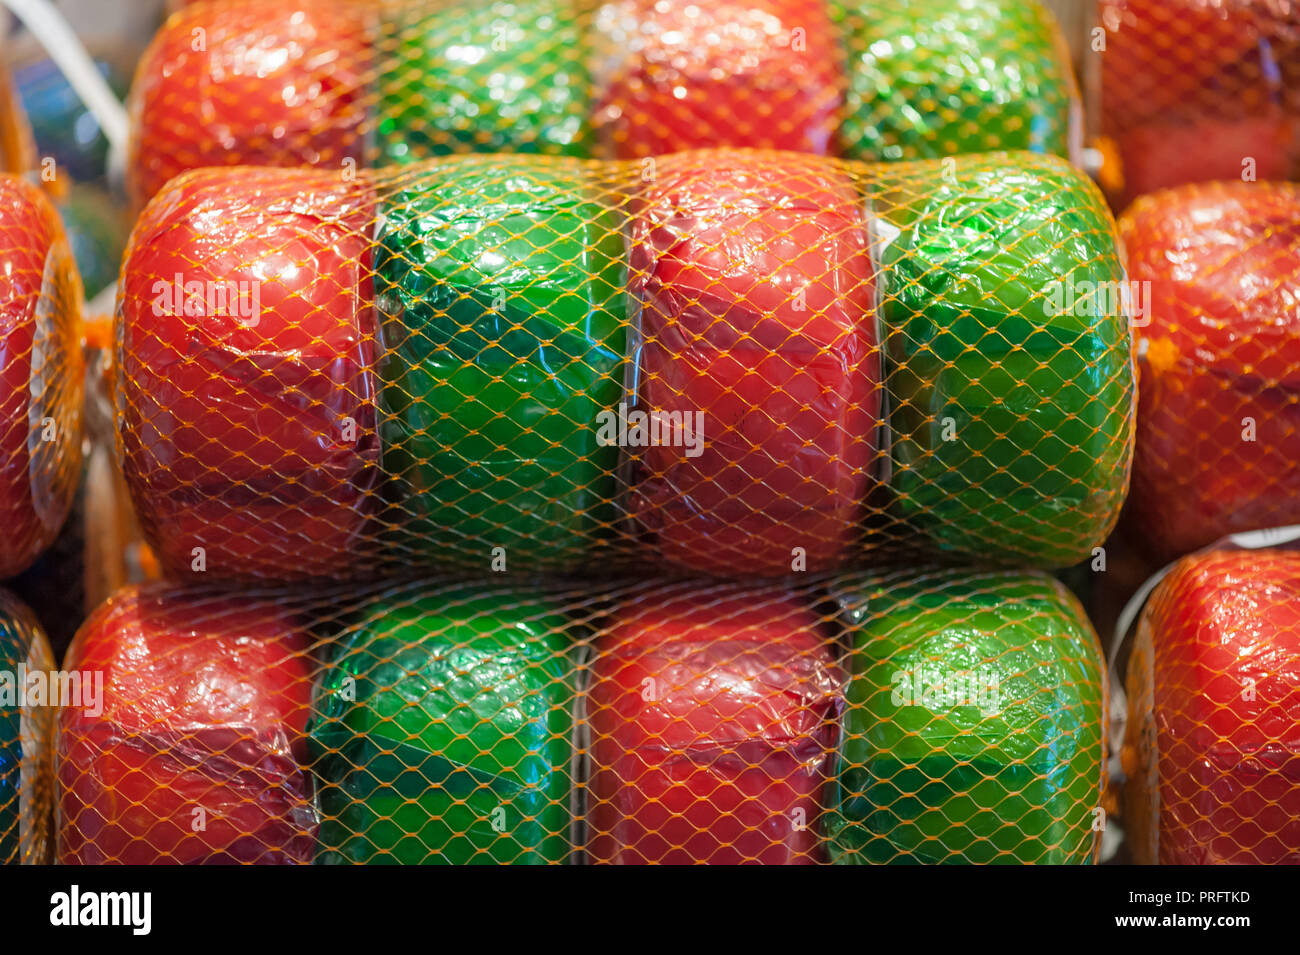 Net of green and red wheels of gouda cheese in a market in the Netherlands Stock Photo